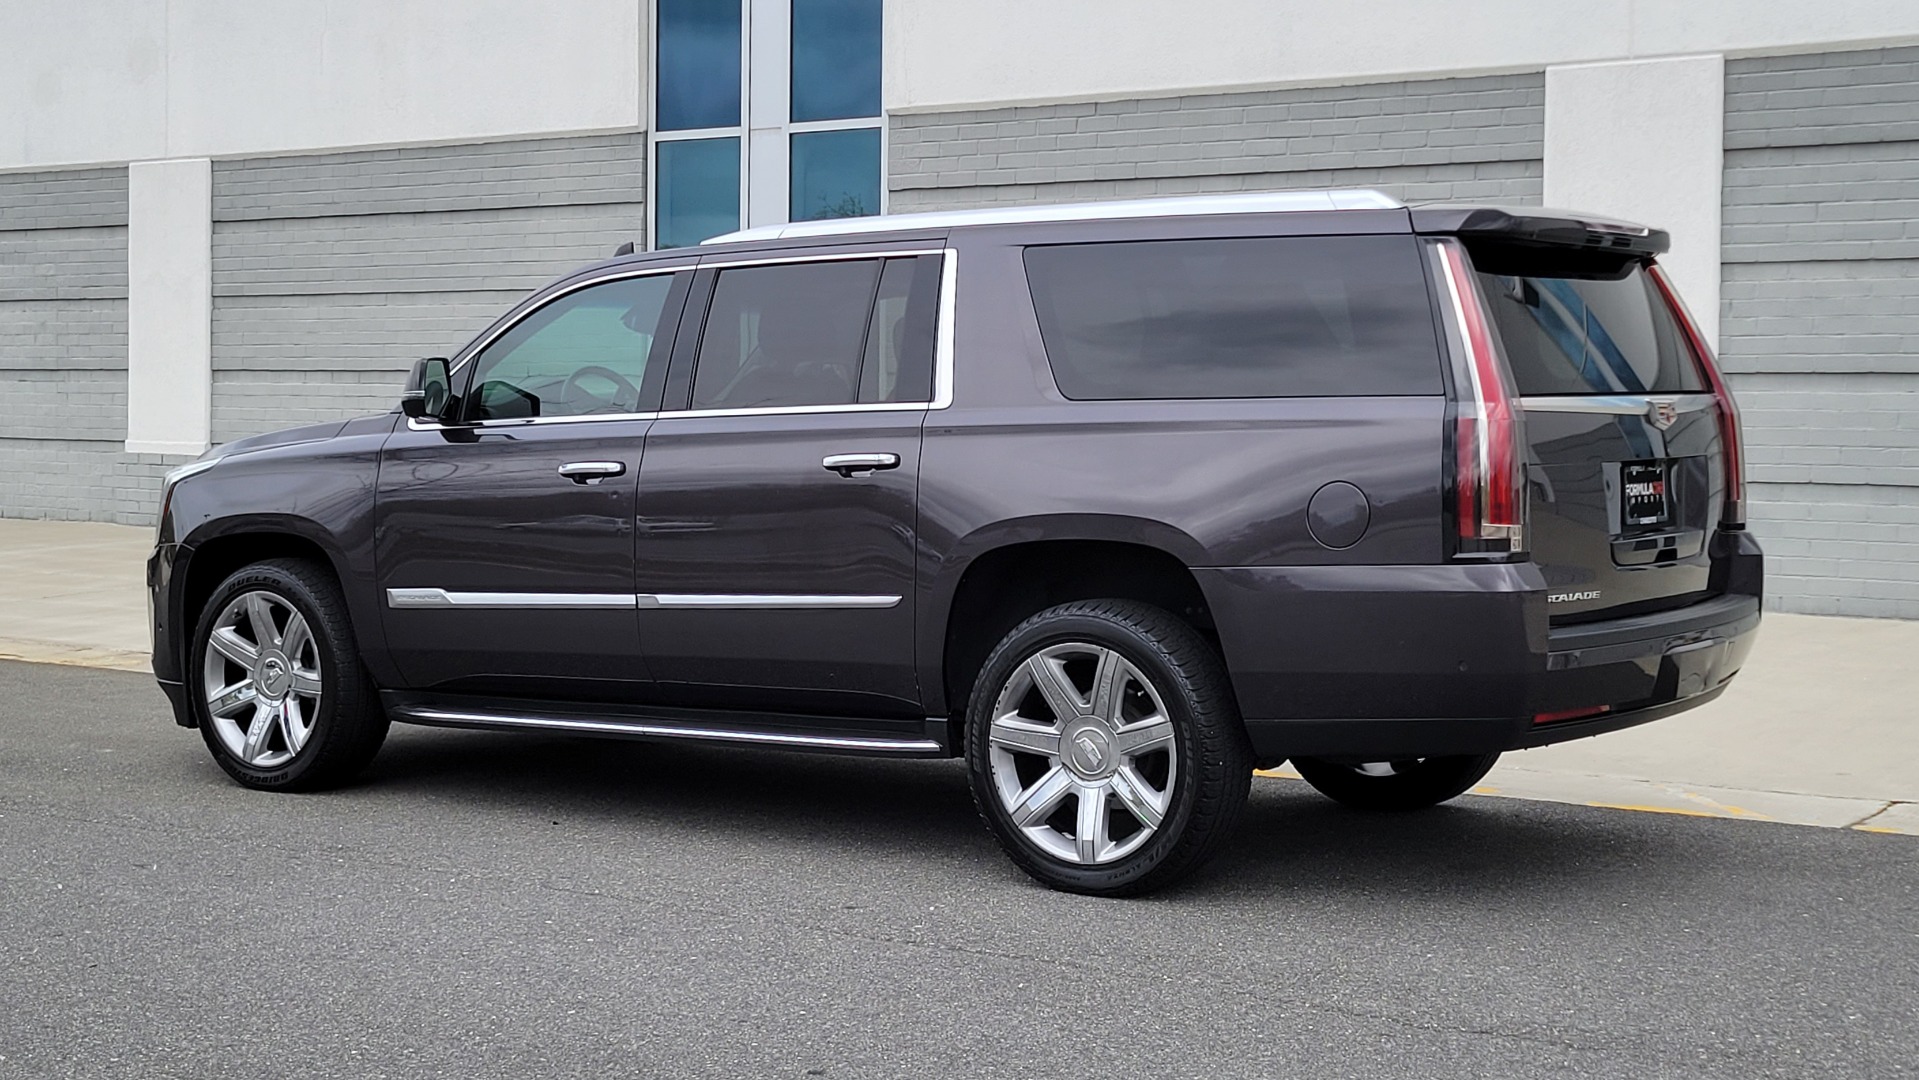 Used 2018 Cadillac ESCALADE ESV LUXURY 4WD 6.2L / NAV / BOSE / SUNROOF / 3-ROW / REARVIEW for sale Sold at Formula Imports in Charlotte NC 28227 6